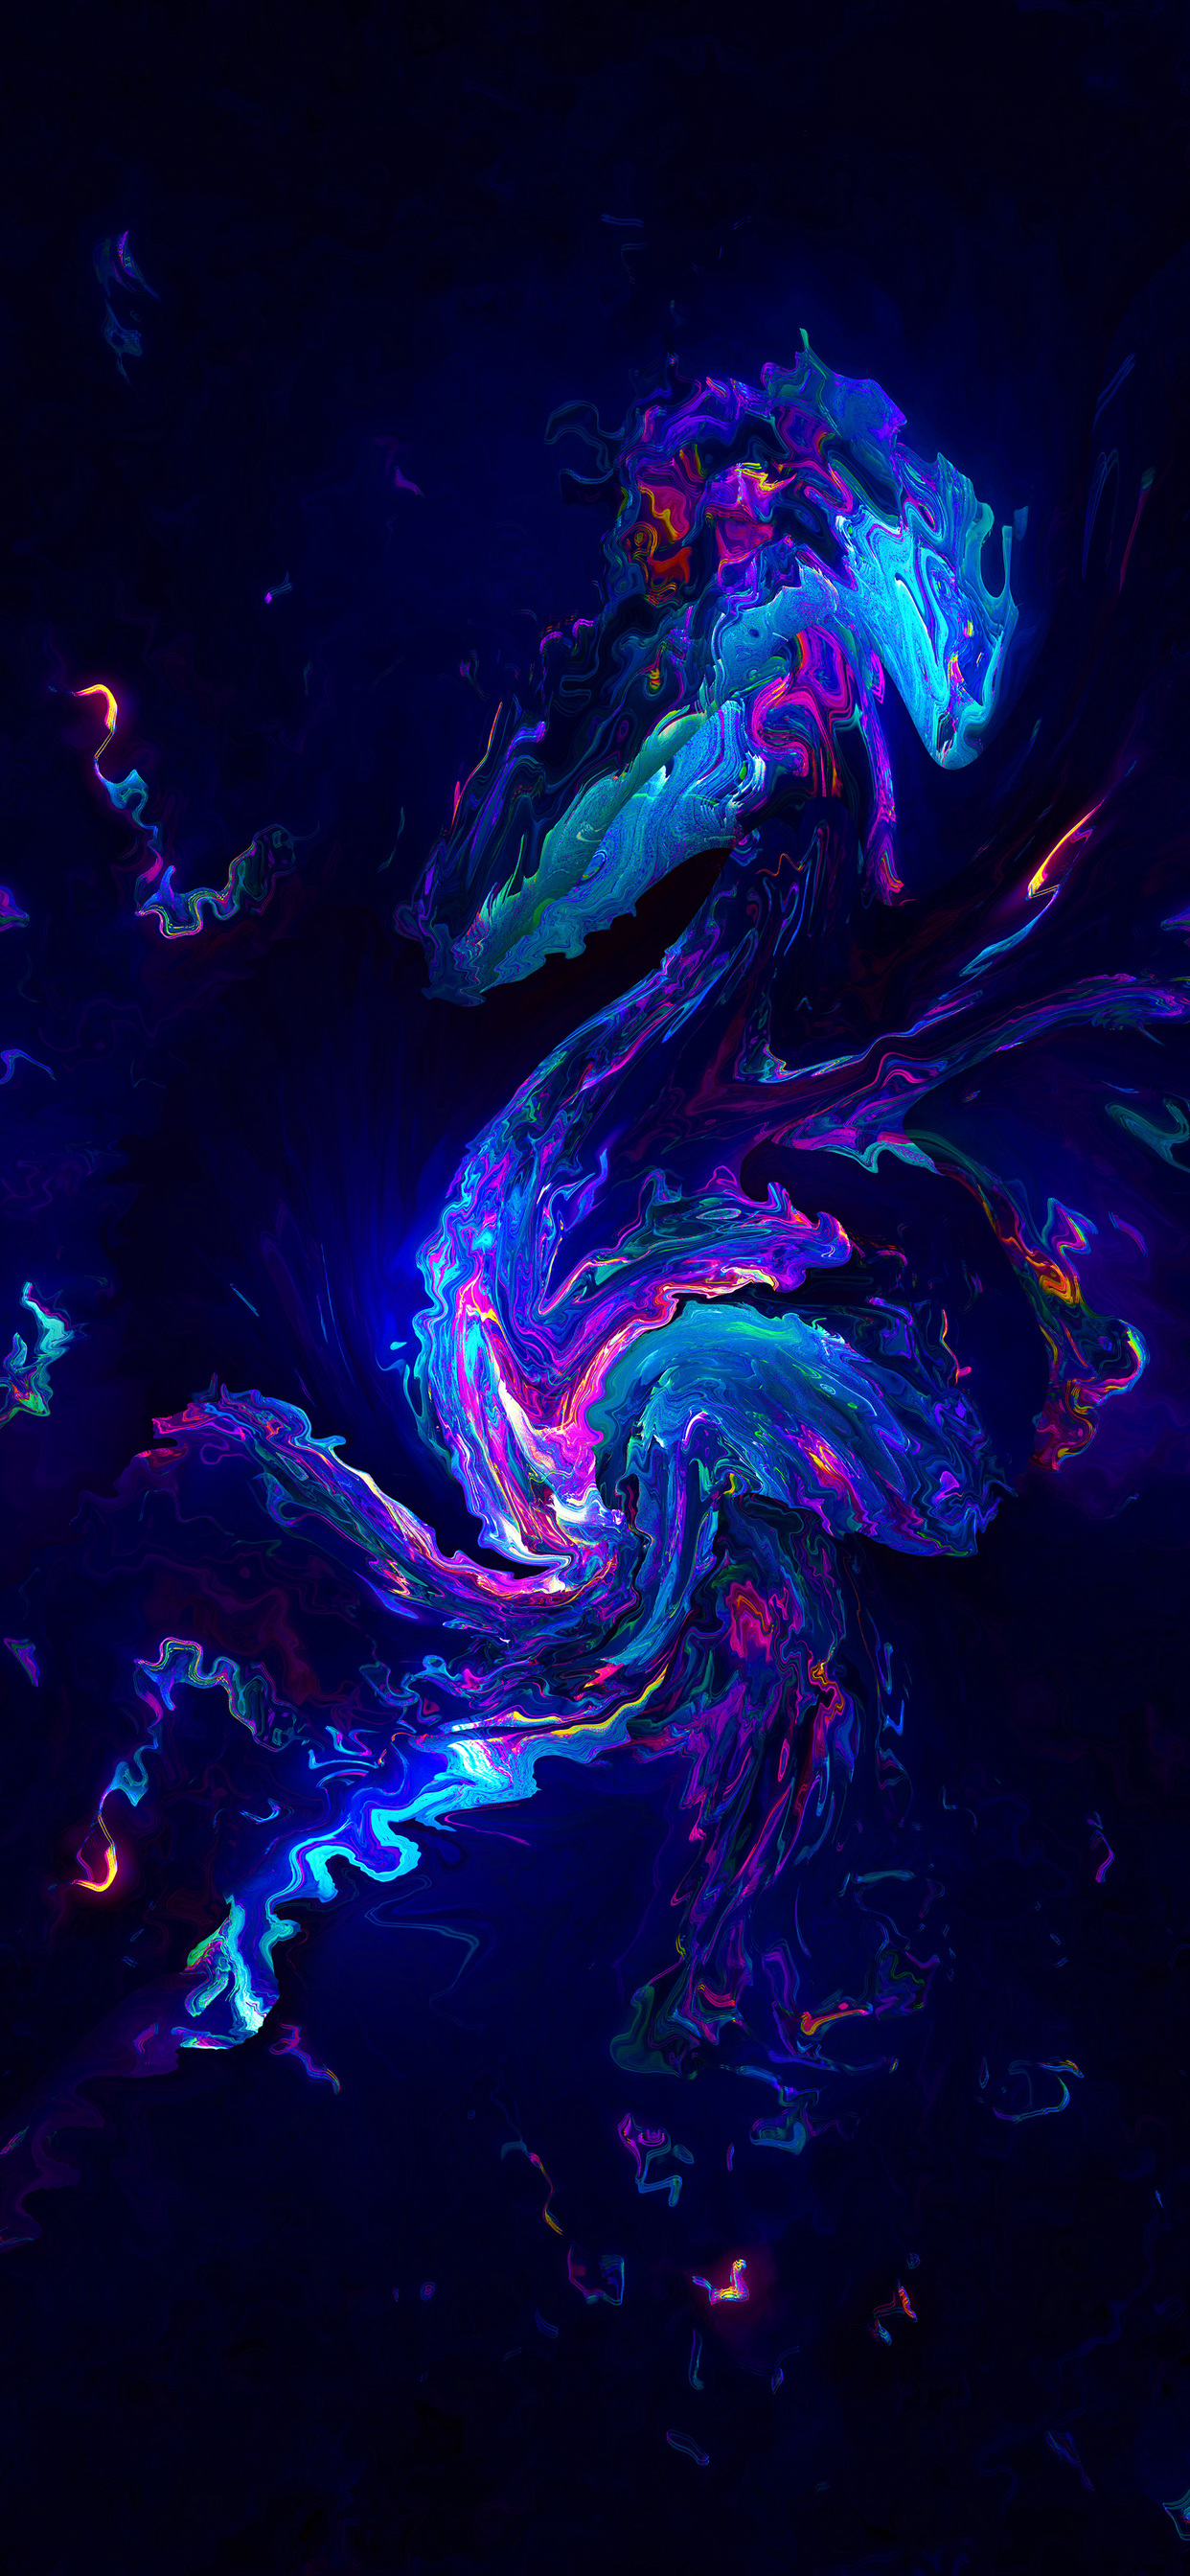 60 Aesthetic Neon Wallpapers for iPhone Free HD Download